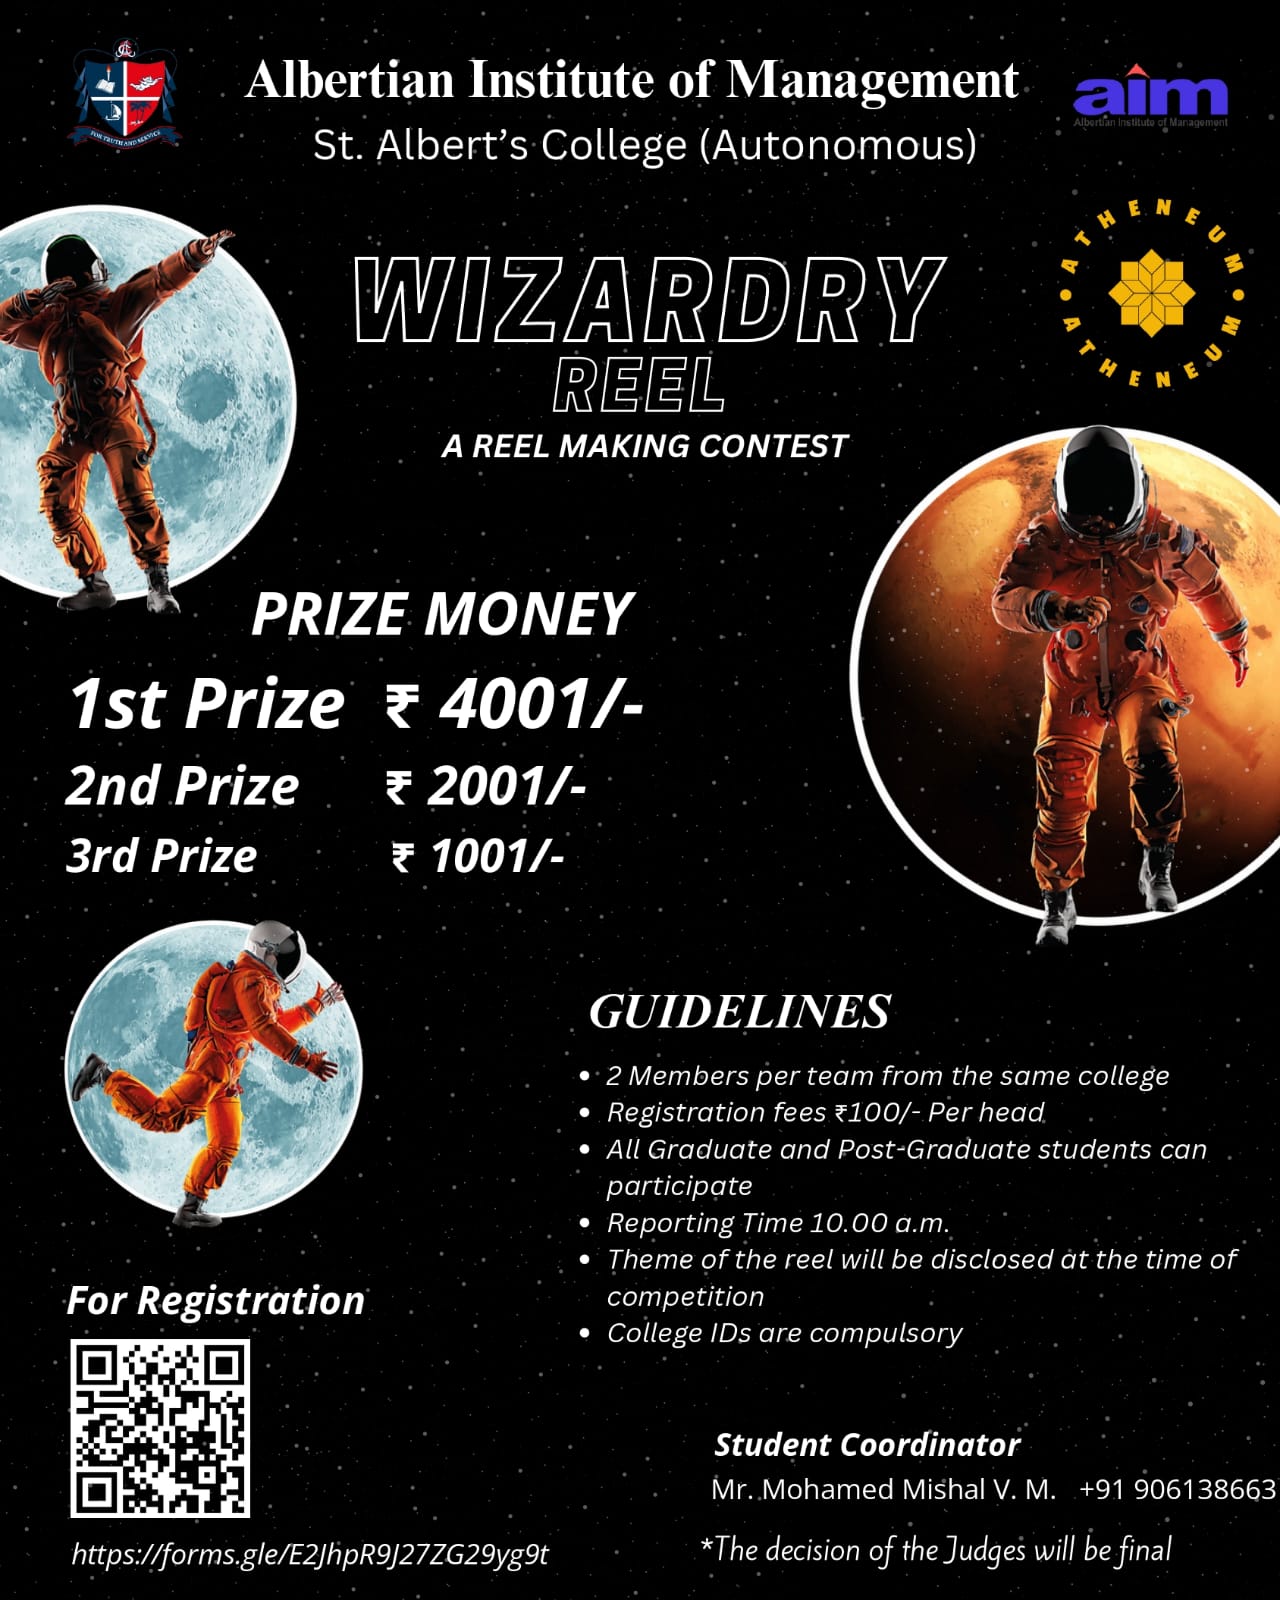 WIZARDRY FEEL A REEL MAKING CONTEST